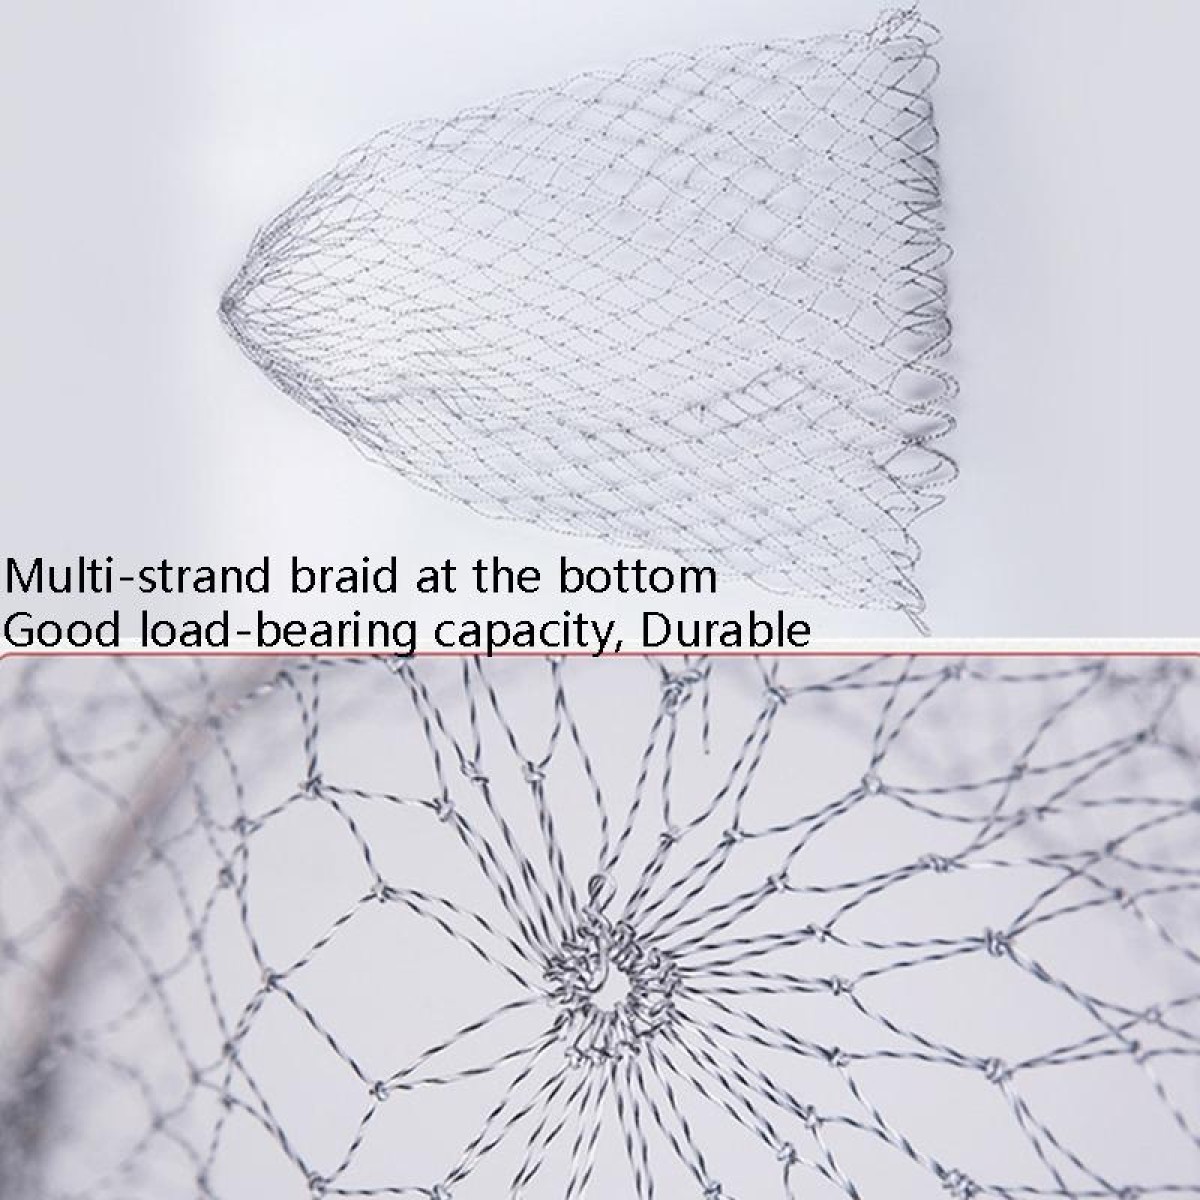 Foldable Stainless Steel Dip Net Head Fishing Net, Specification: Solid 50cm Big Mesh